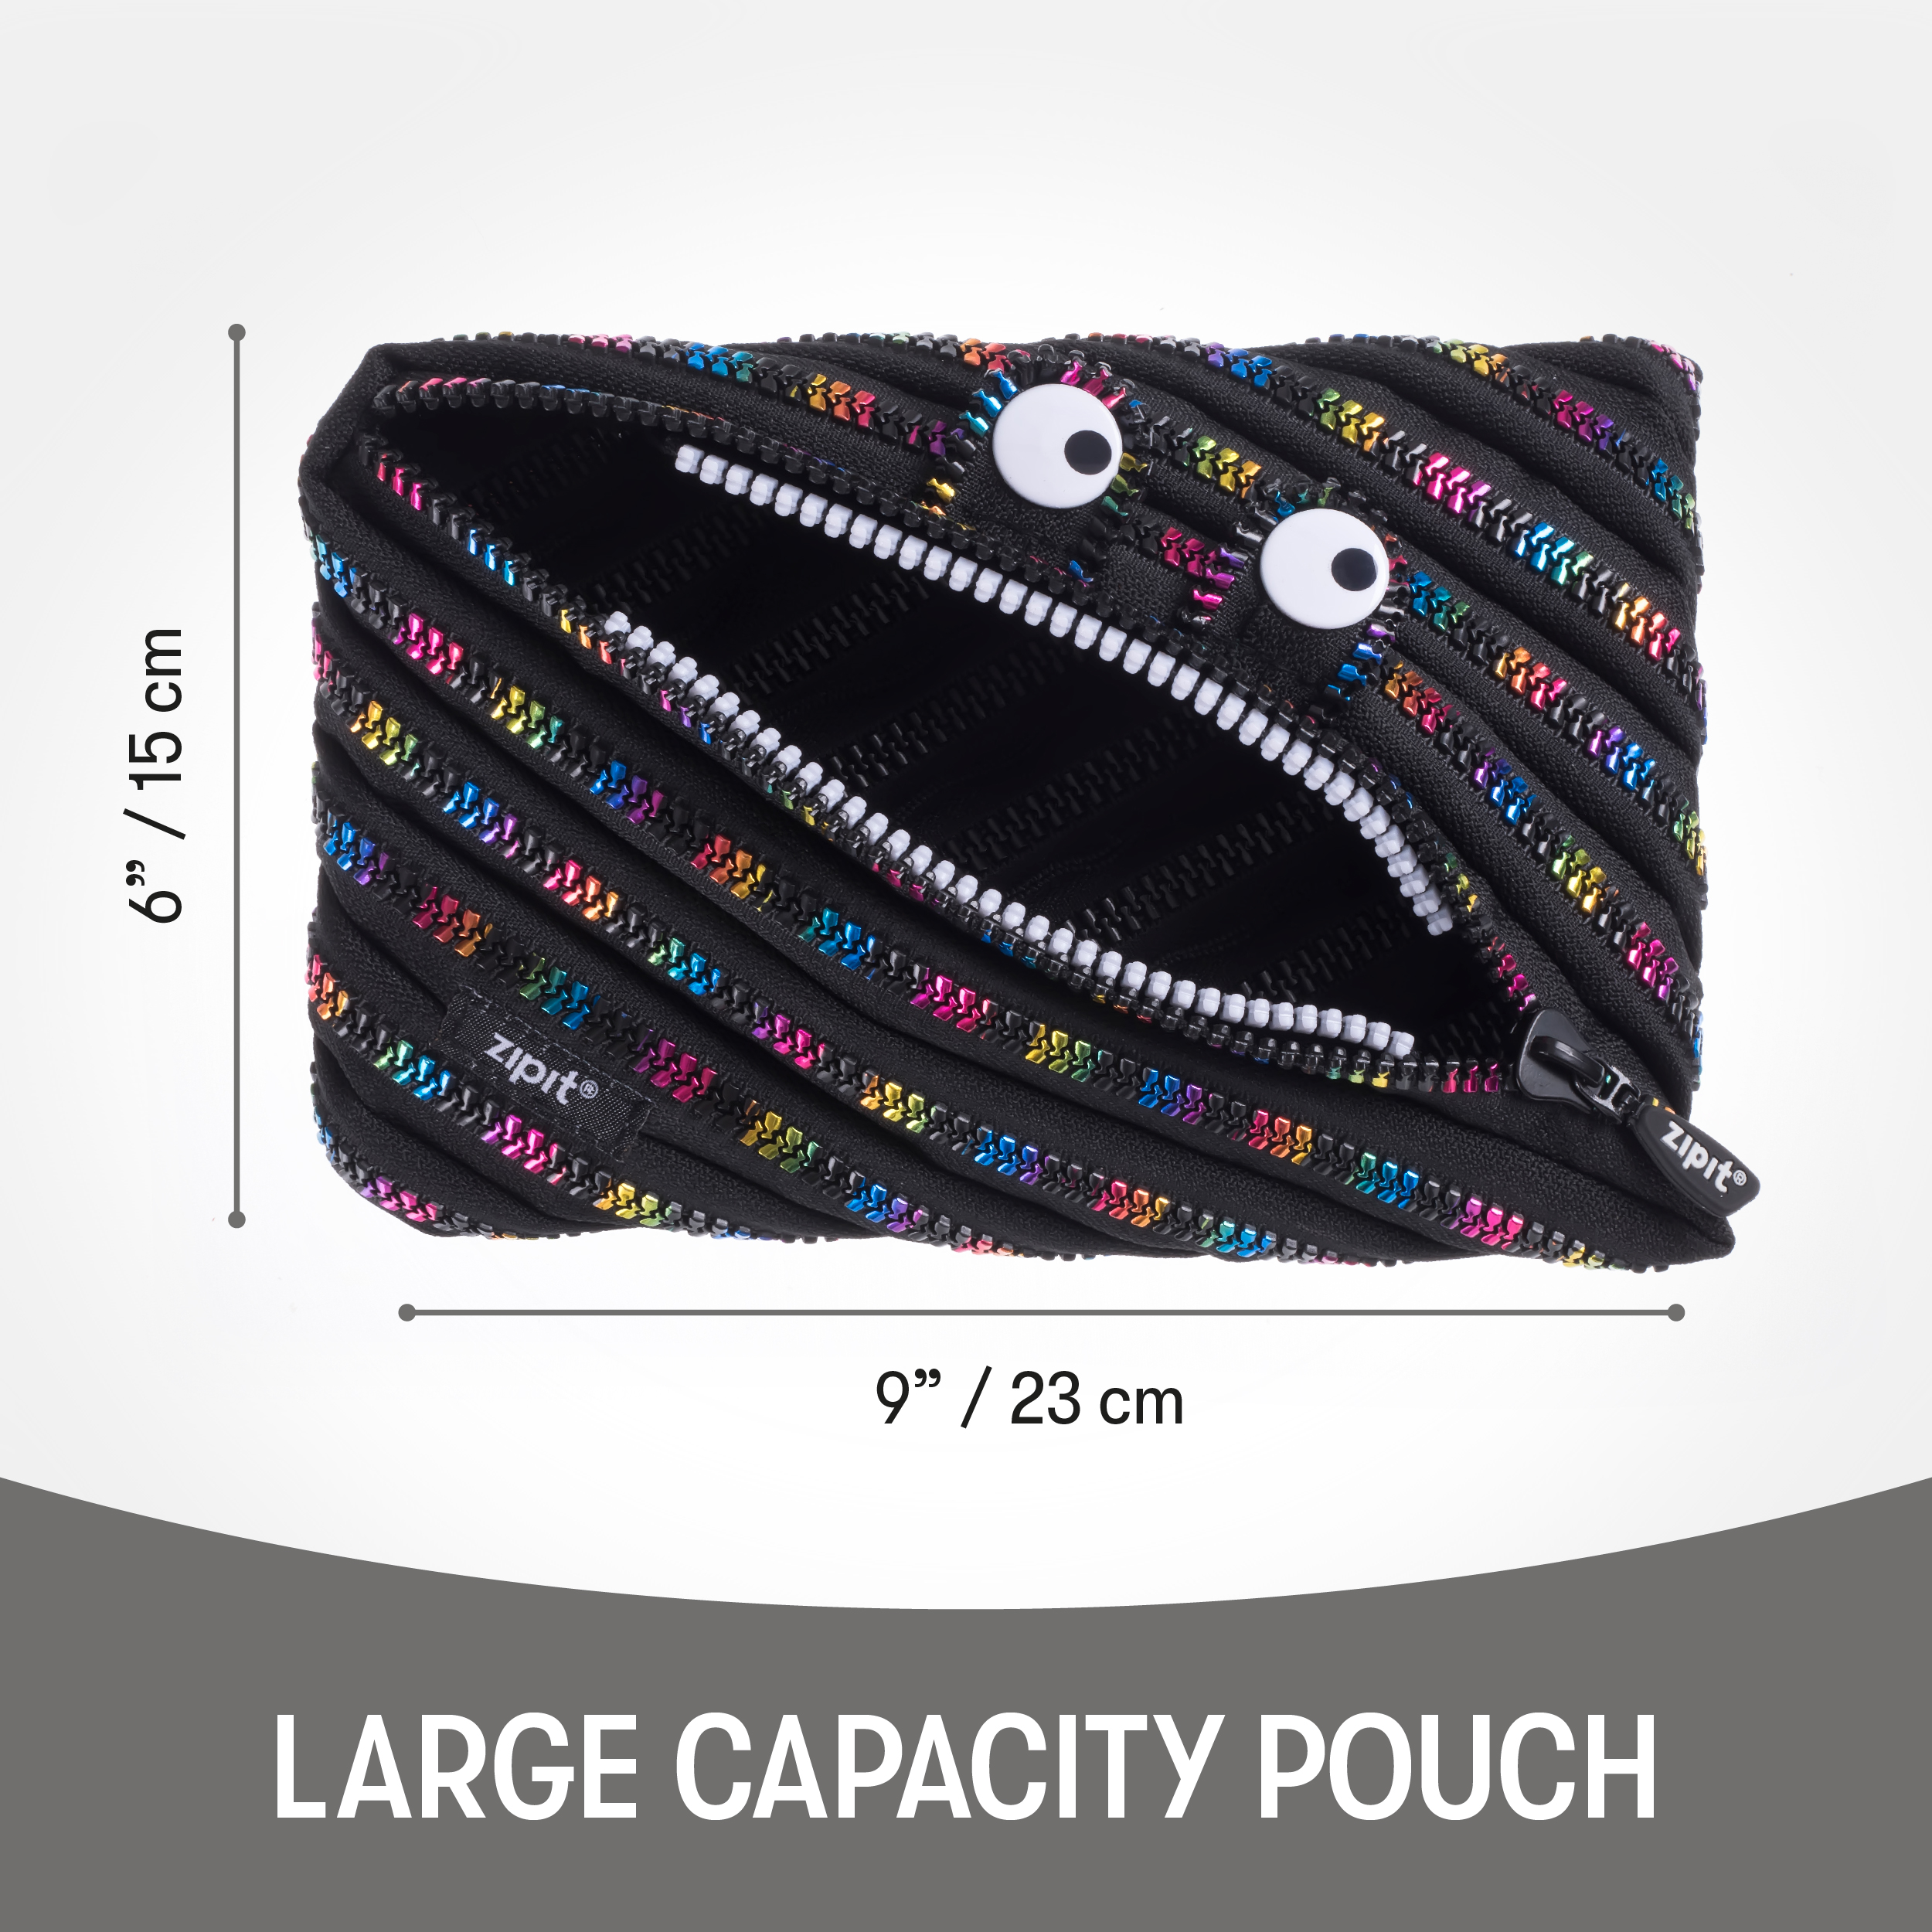 ZIPIT Monster Large Pencil Case for Kids, Cute Pencil Pouch for Boys & Girls, Black - image 3 of 9